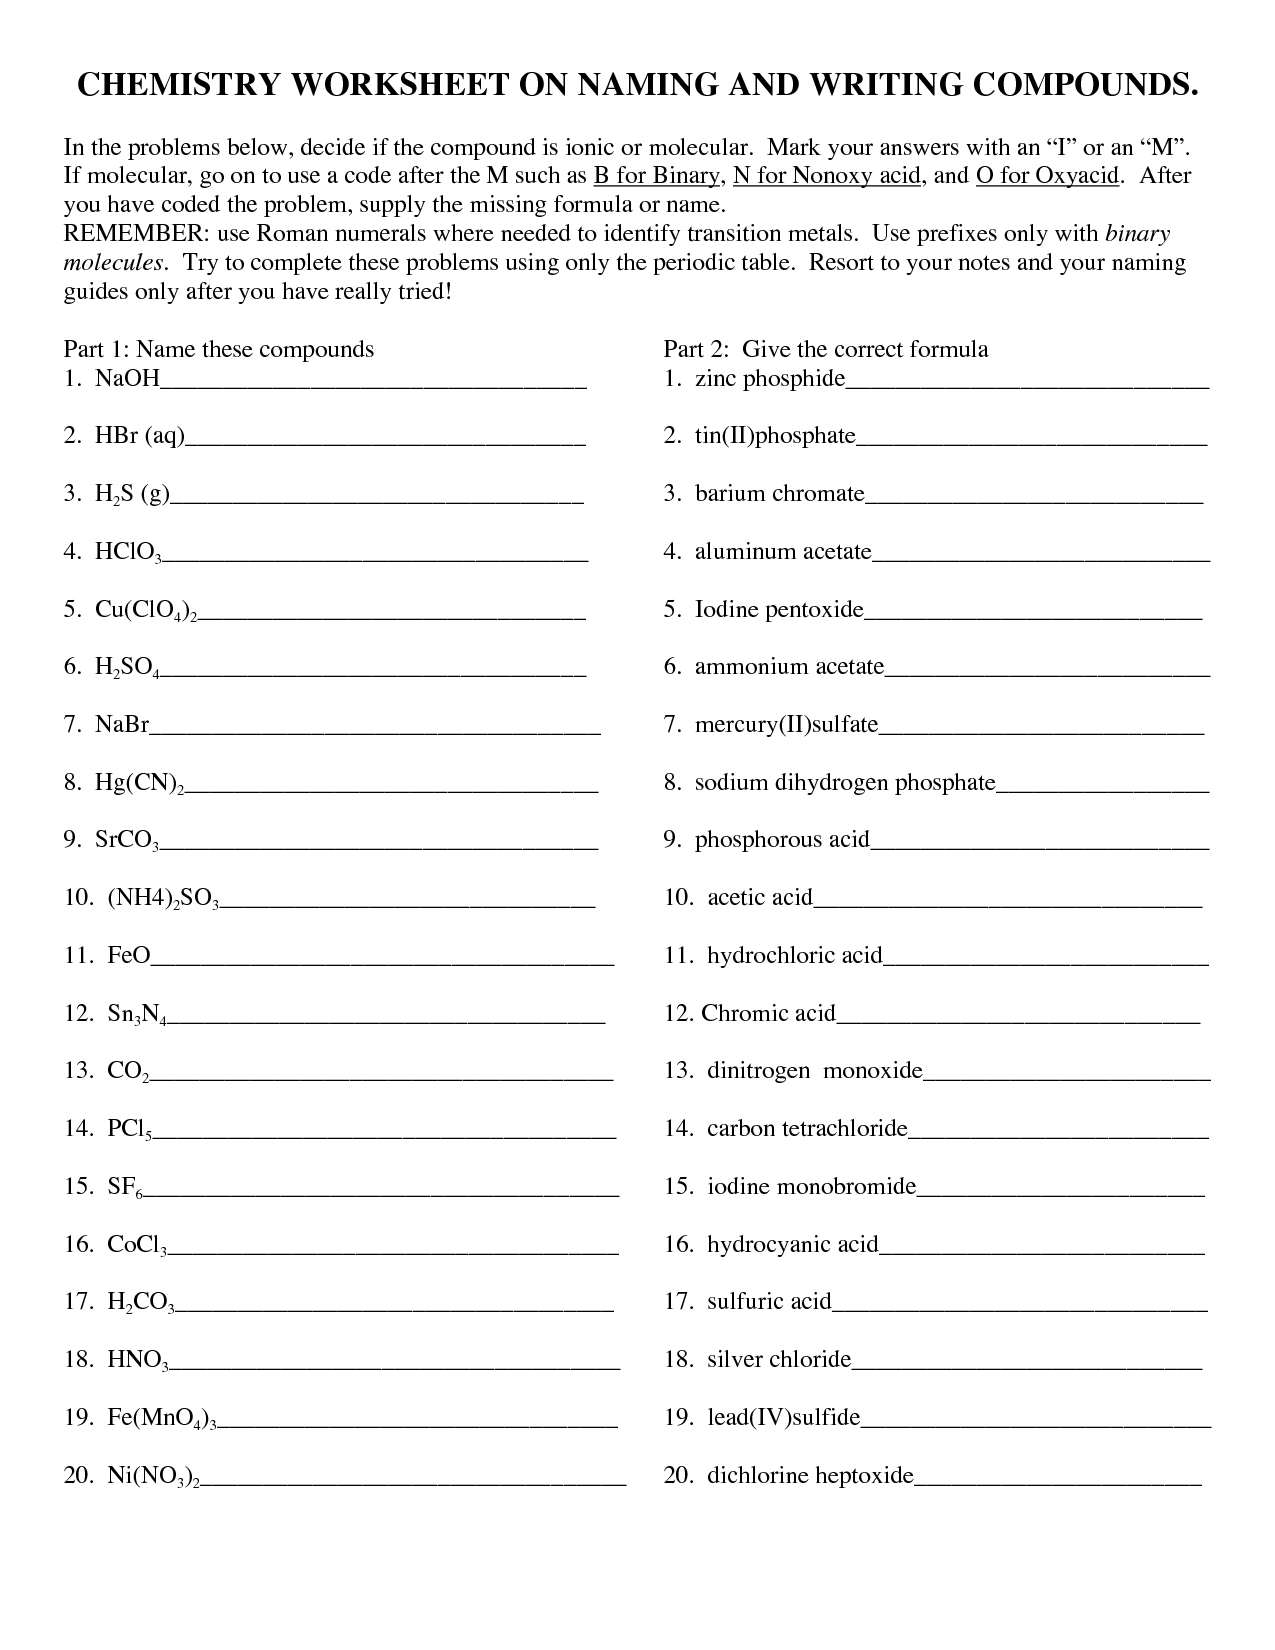 Organic Compounds Worksheet Answers